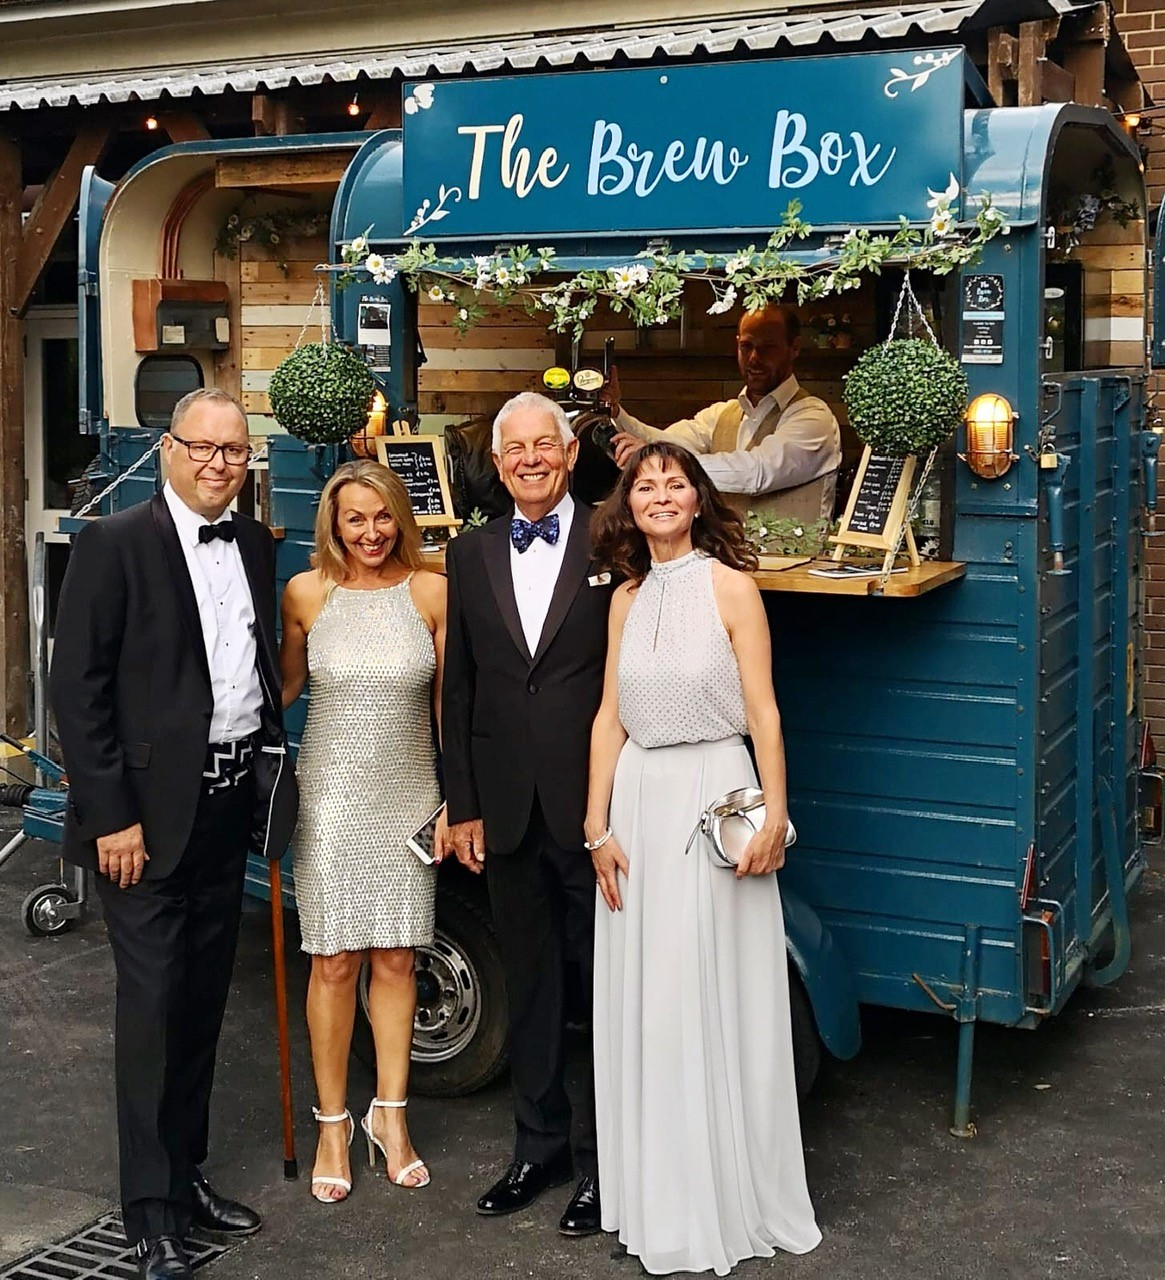 Brew Box at a black tie event, with bar tender serving drinks